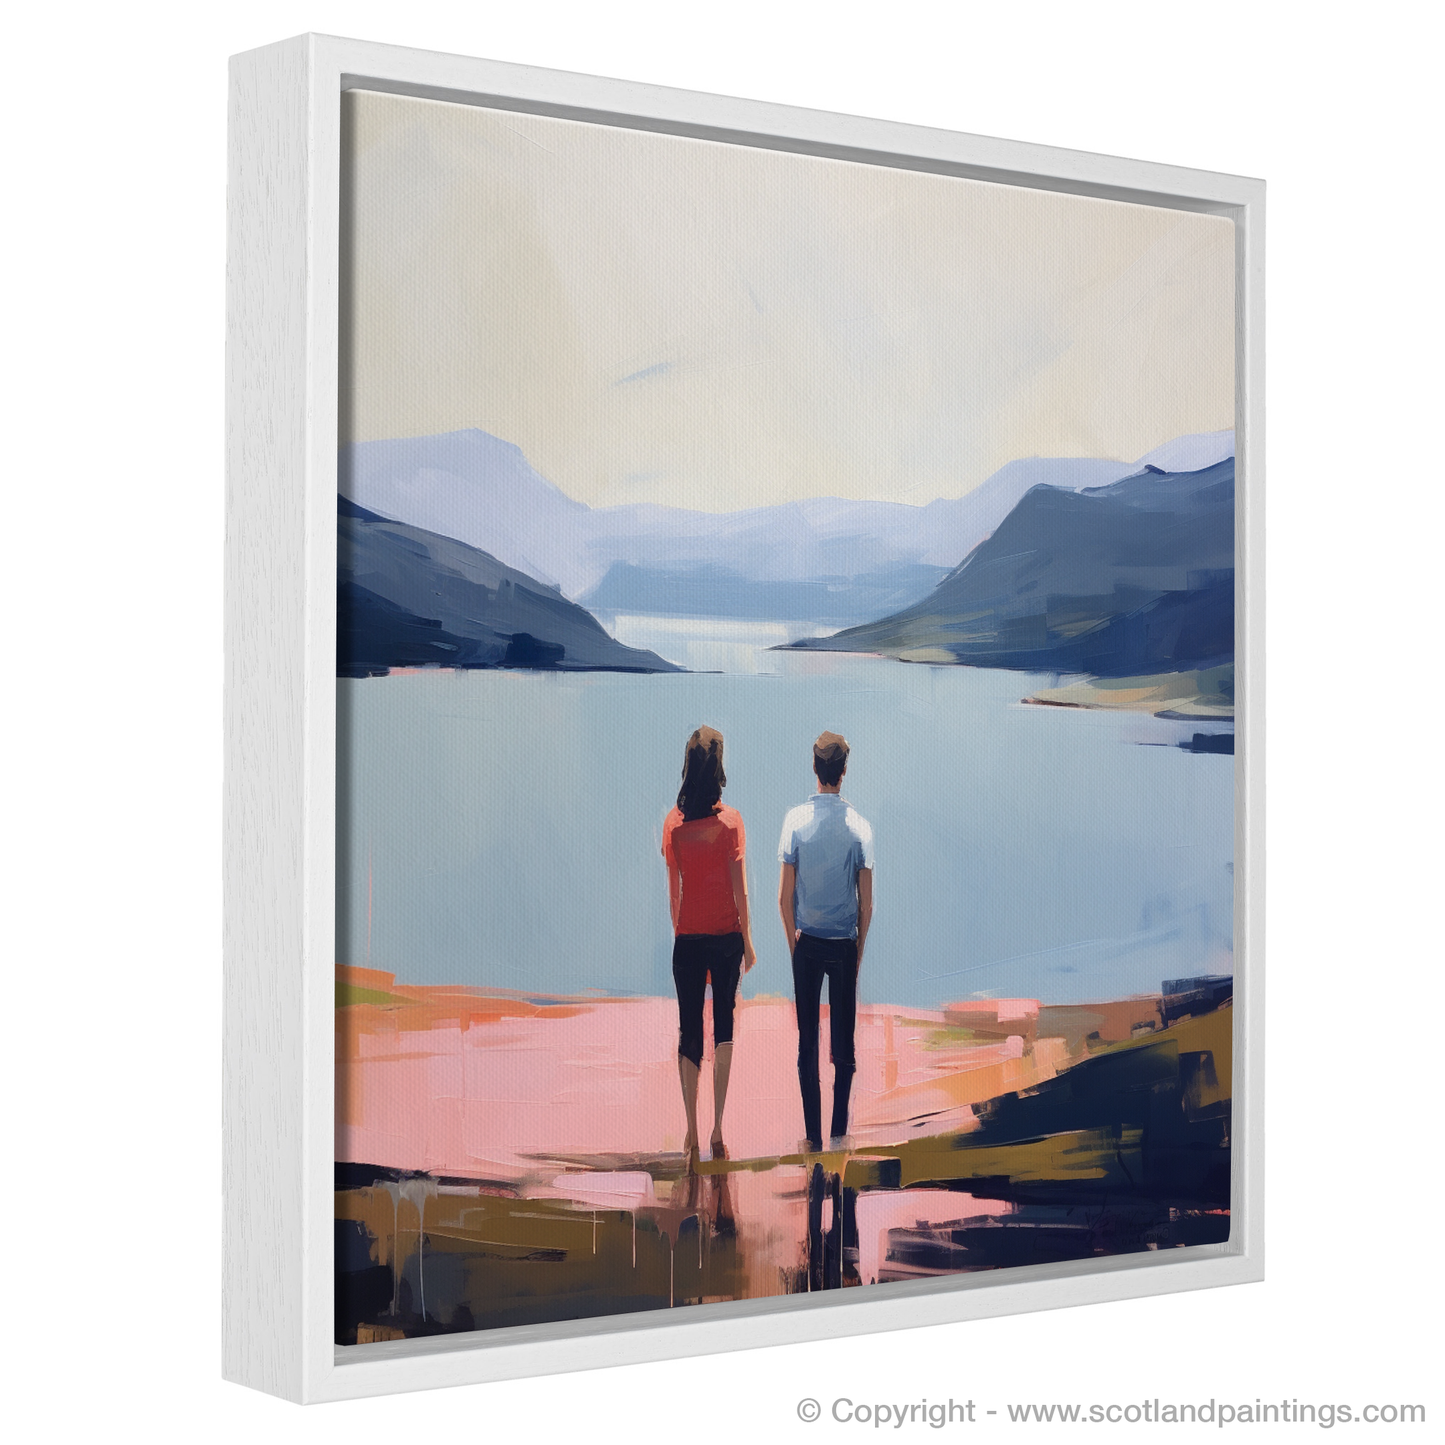 Painting and Art Print of A couple holding hands looking out on Loch Lomond entitled "Embrace at Loch Lomond: A Contemporary Vision of Serenity and Togetherness".